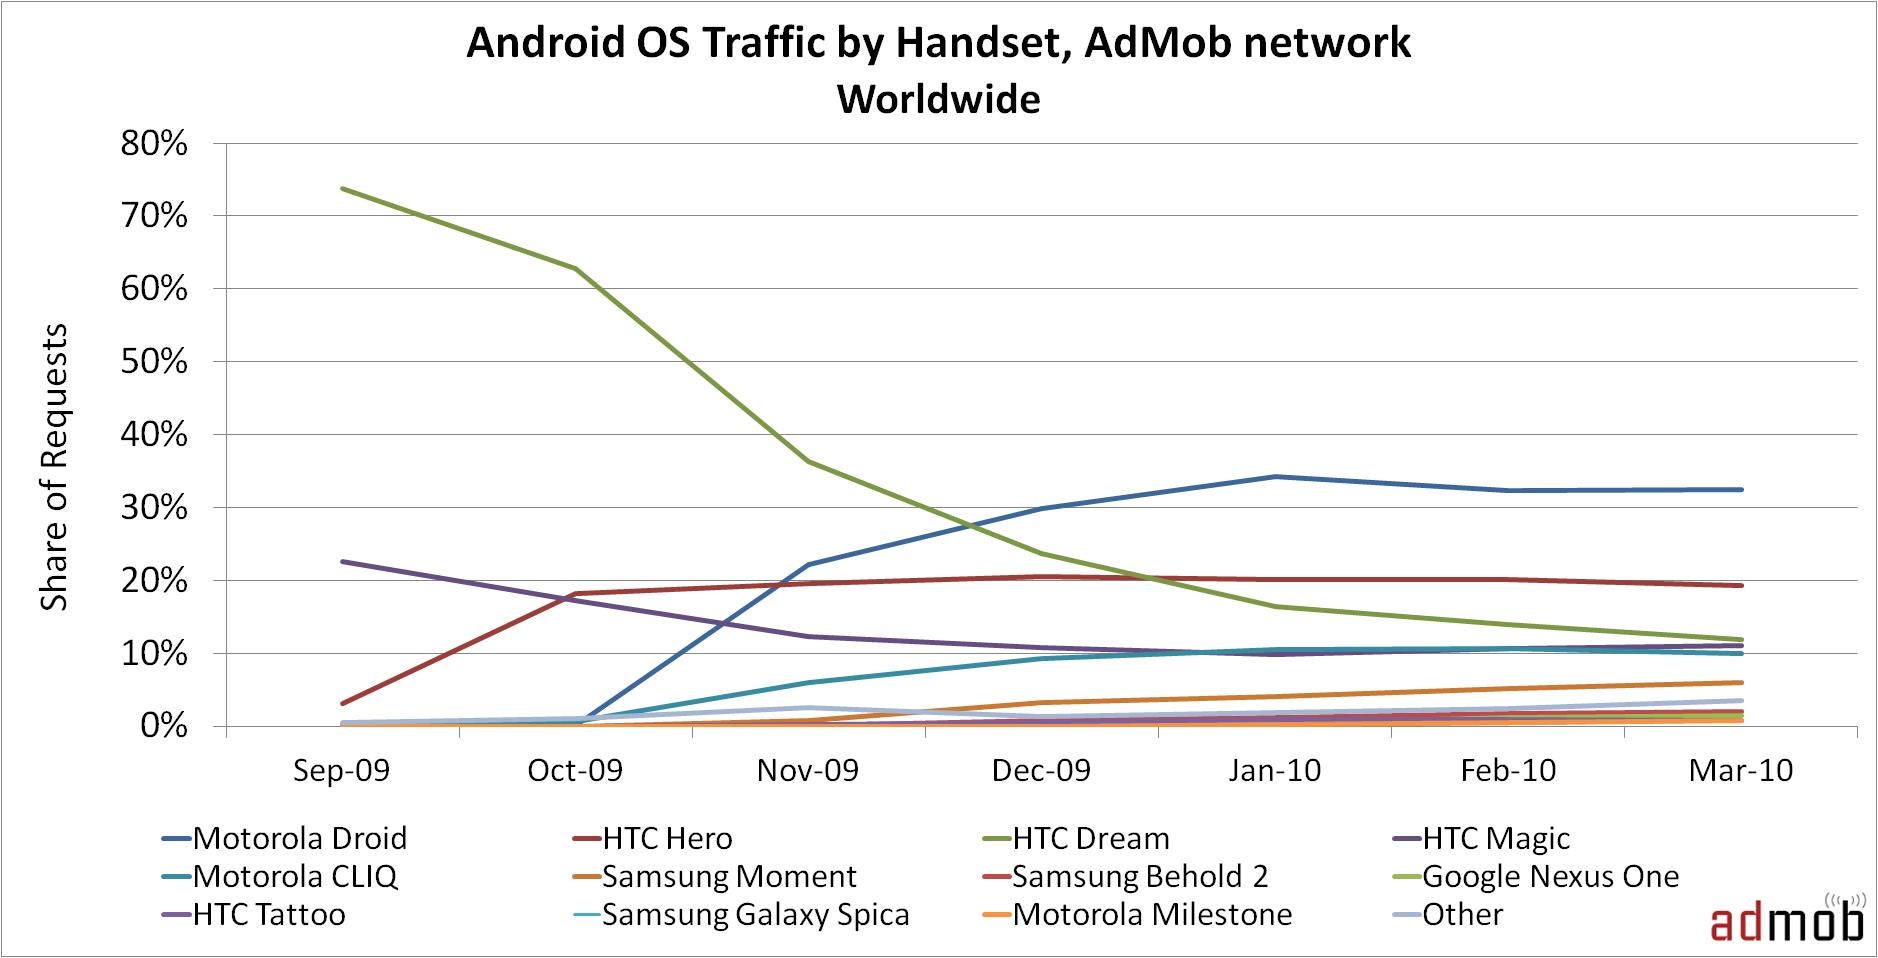 Android passes iPhone in U.S. traffic during March